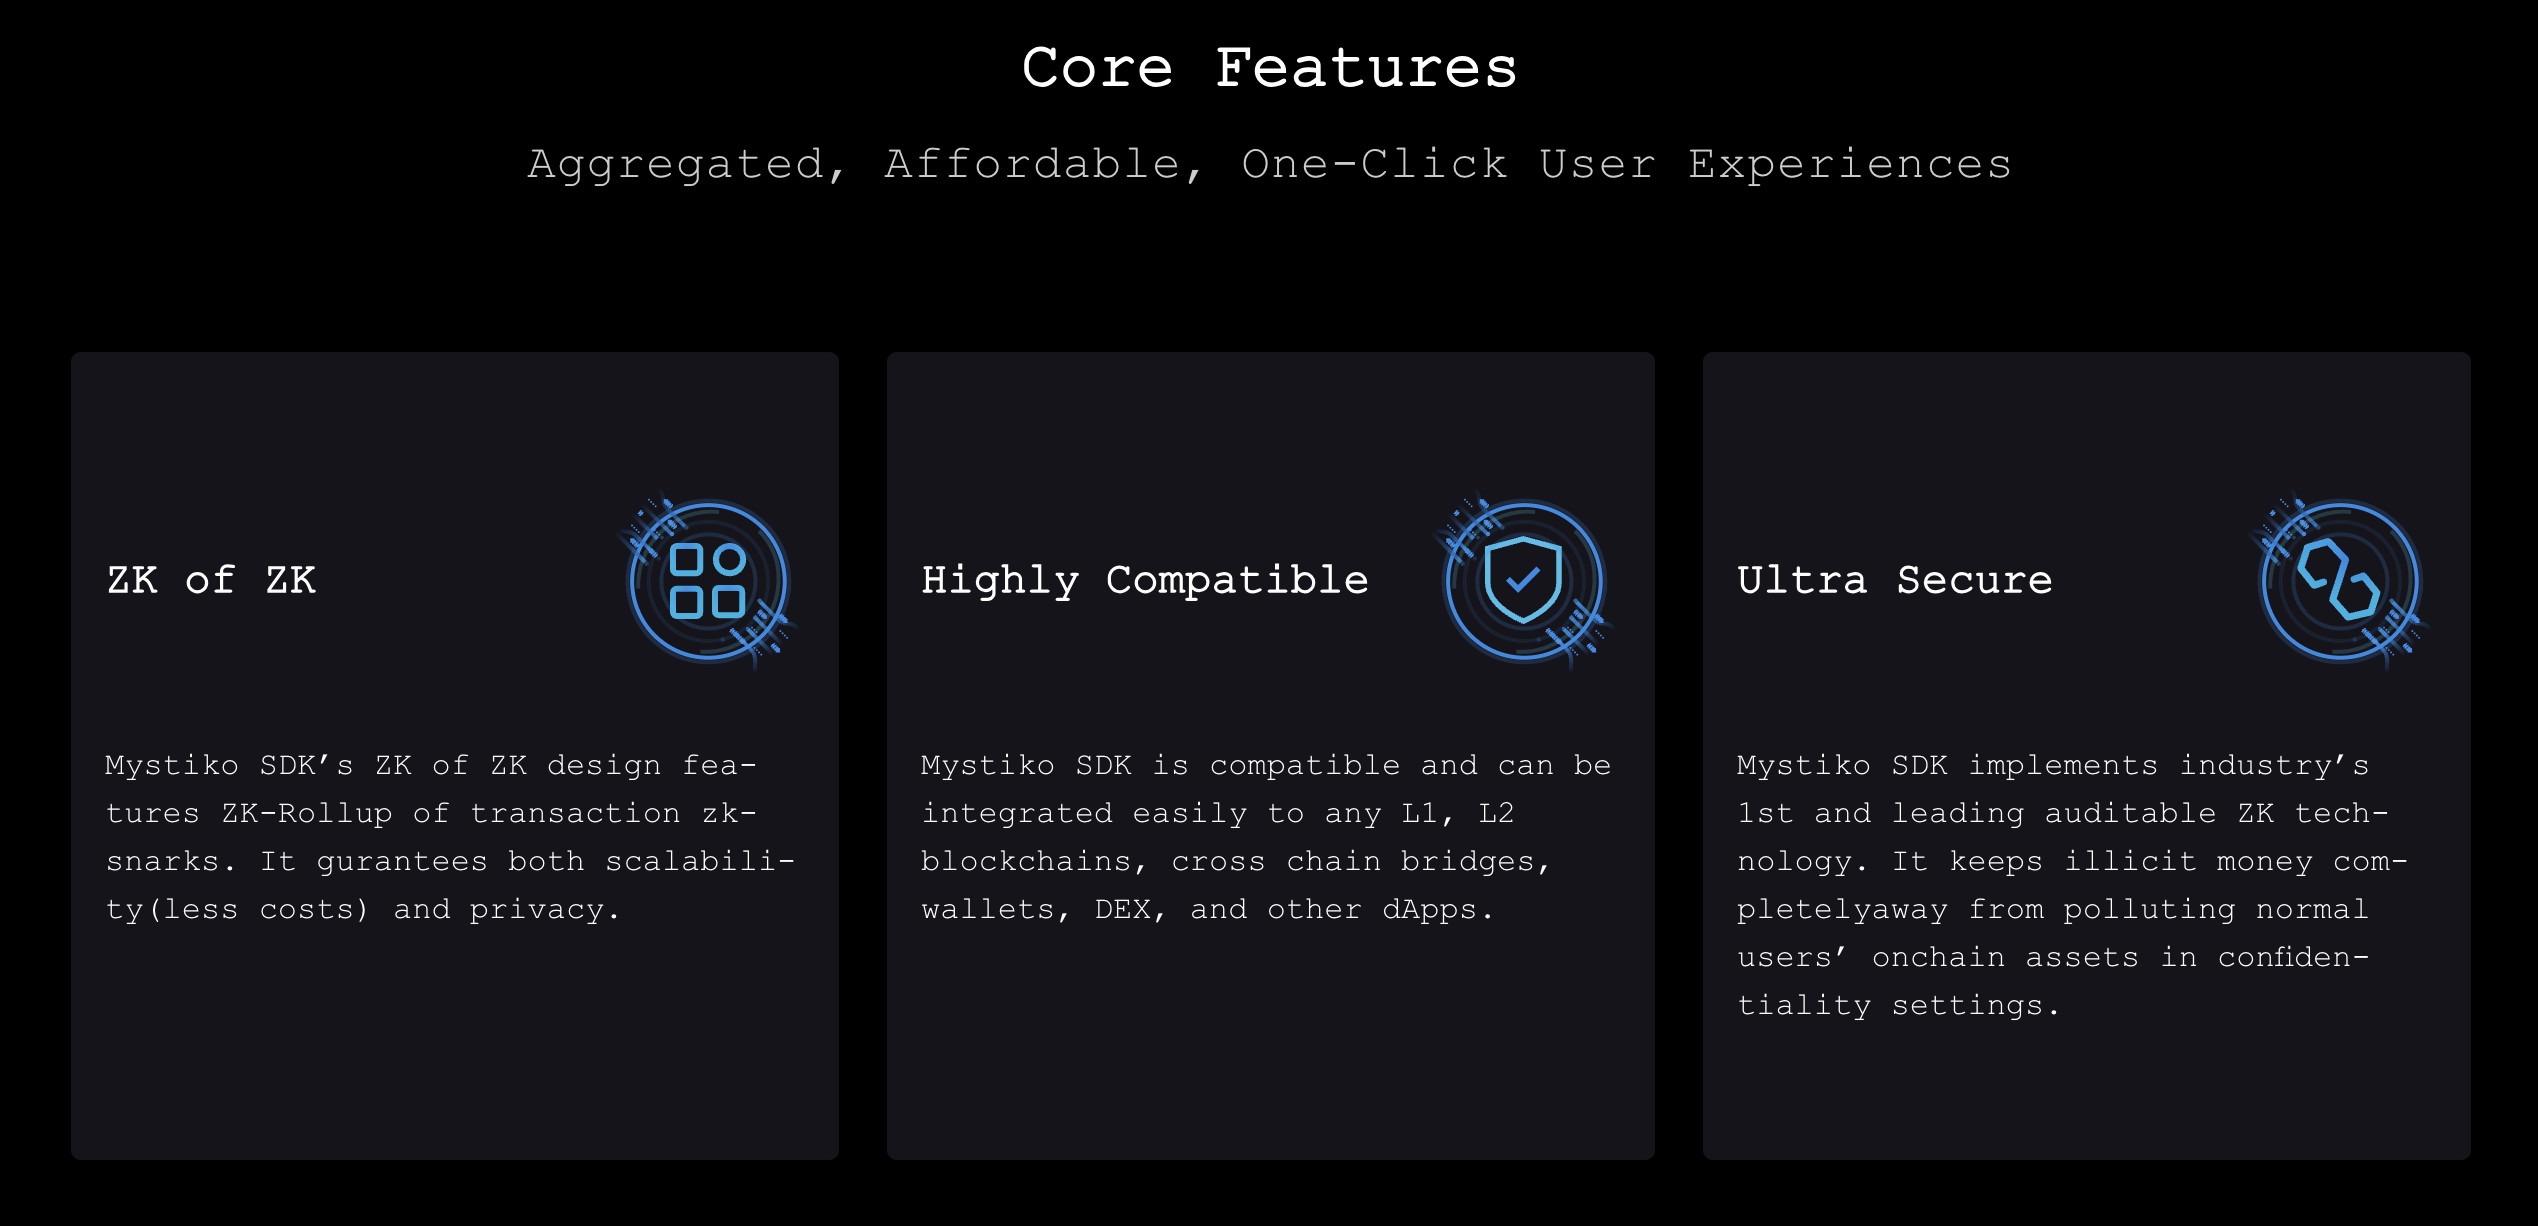 Core Features